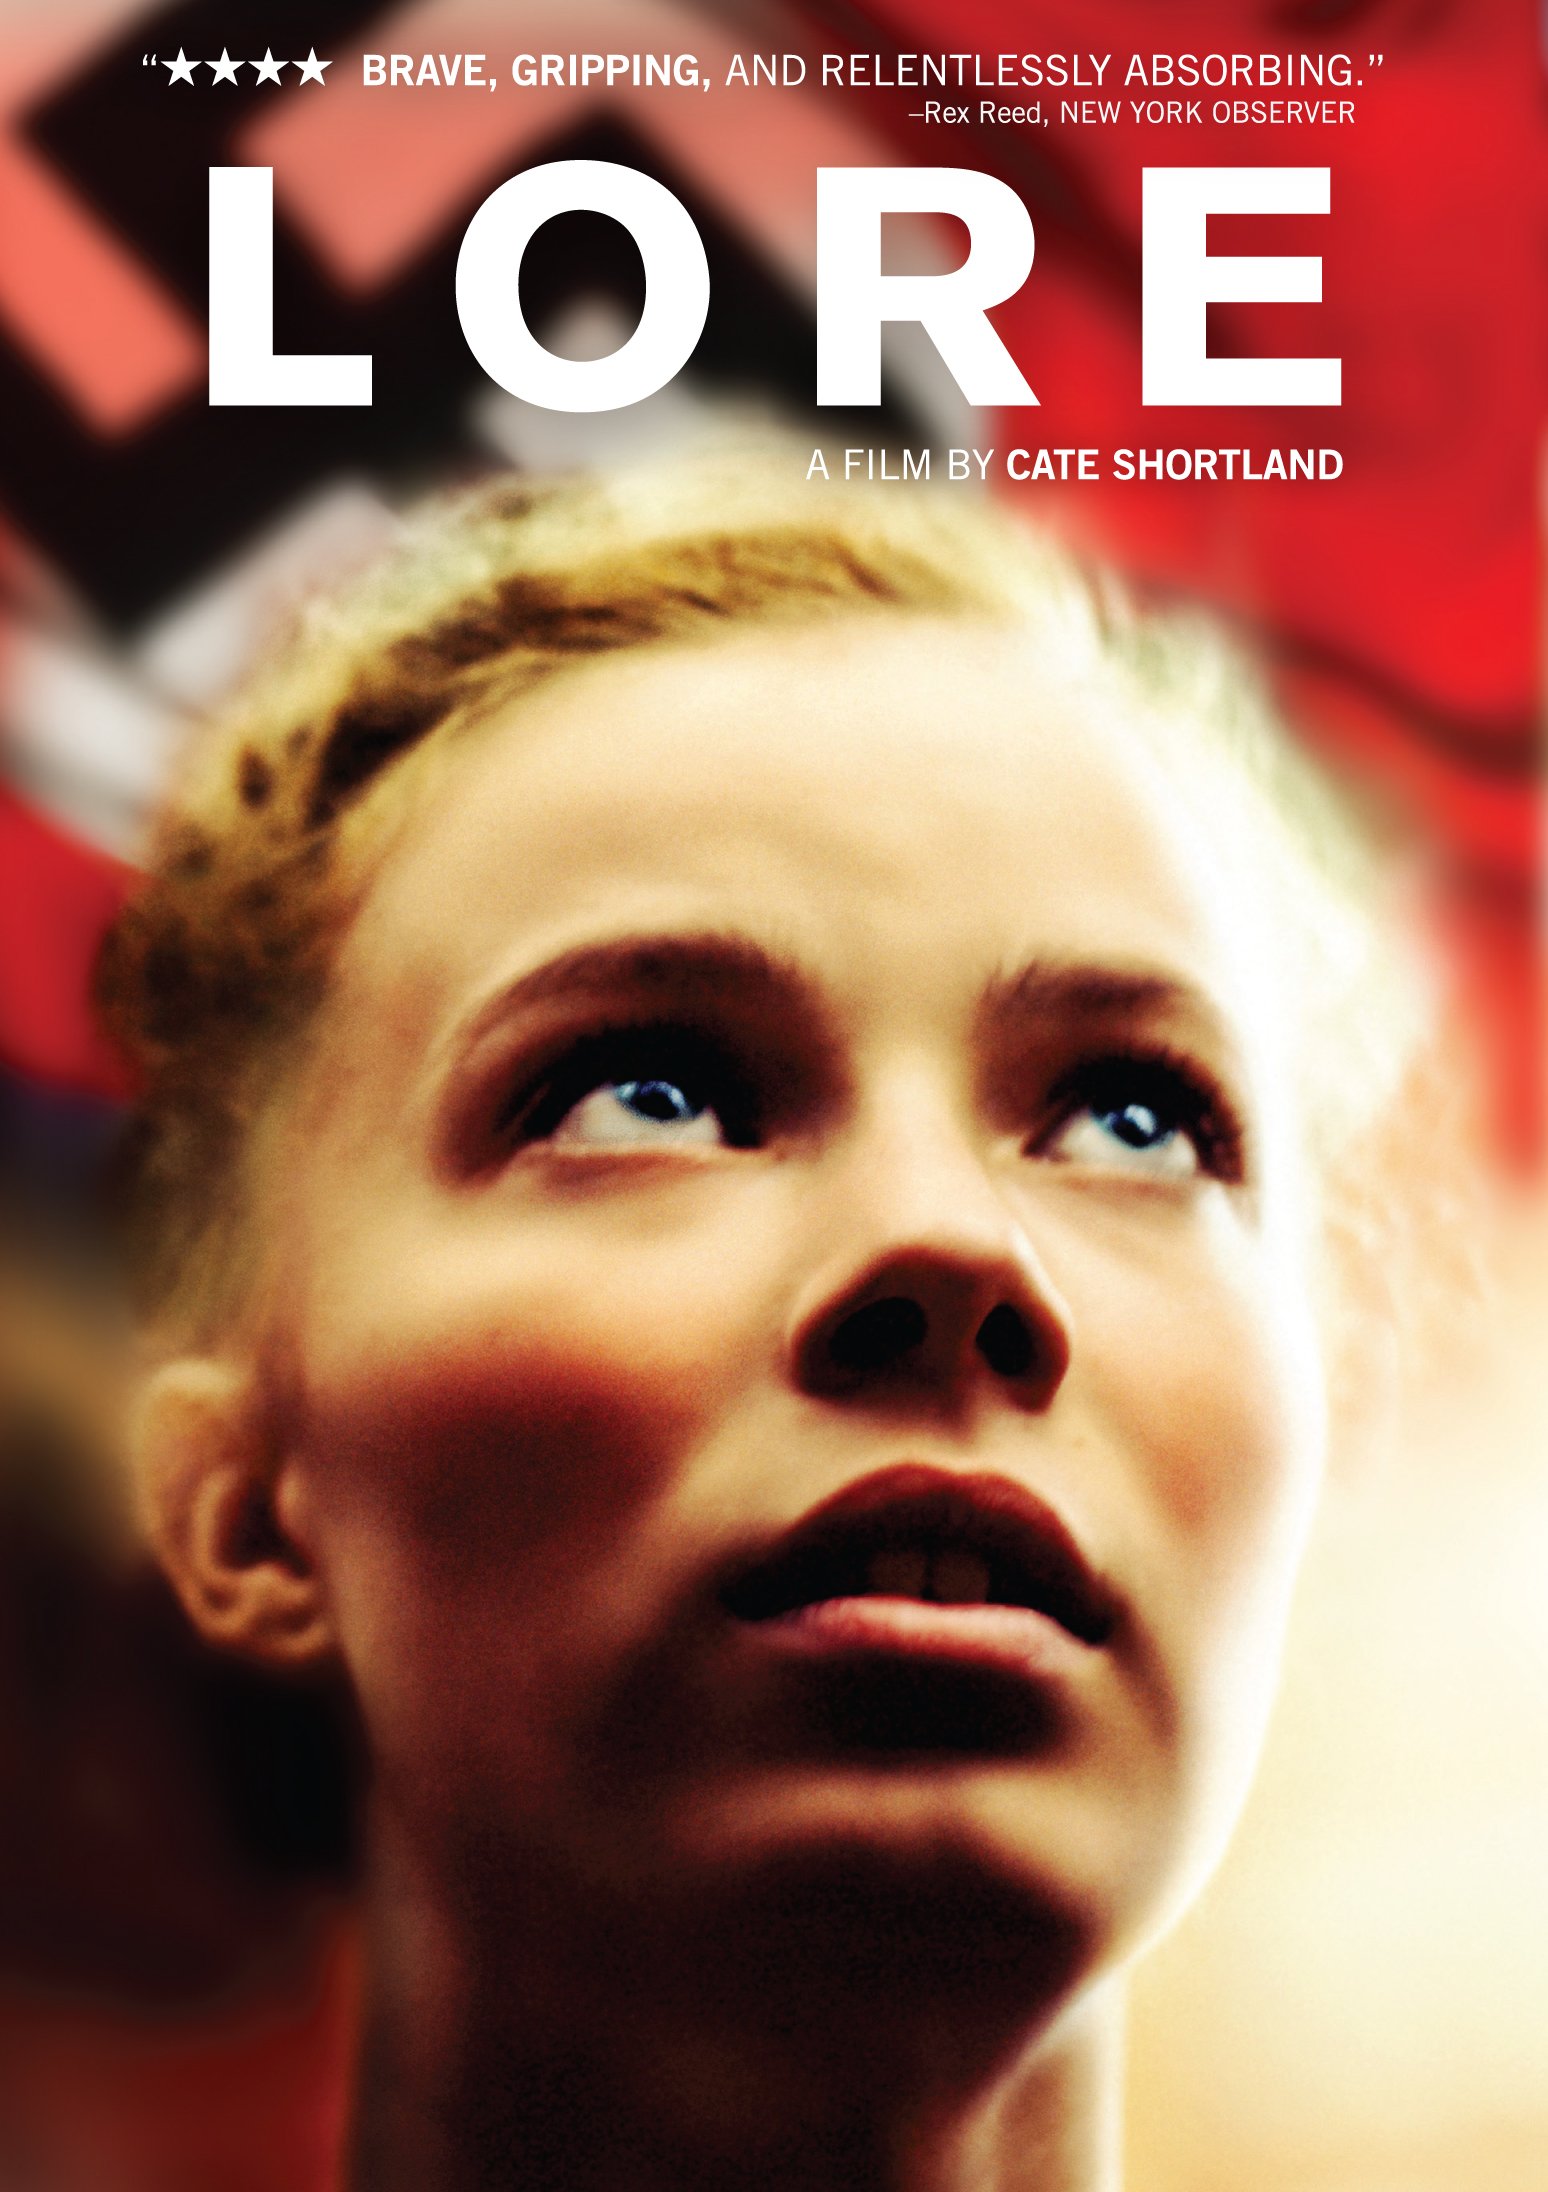 Lore DVD Release Date May 28, 2013